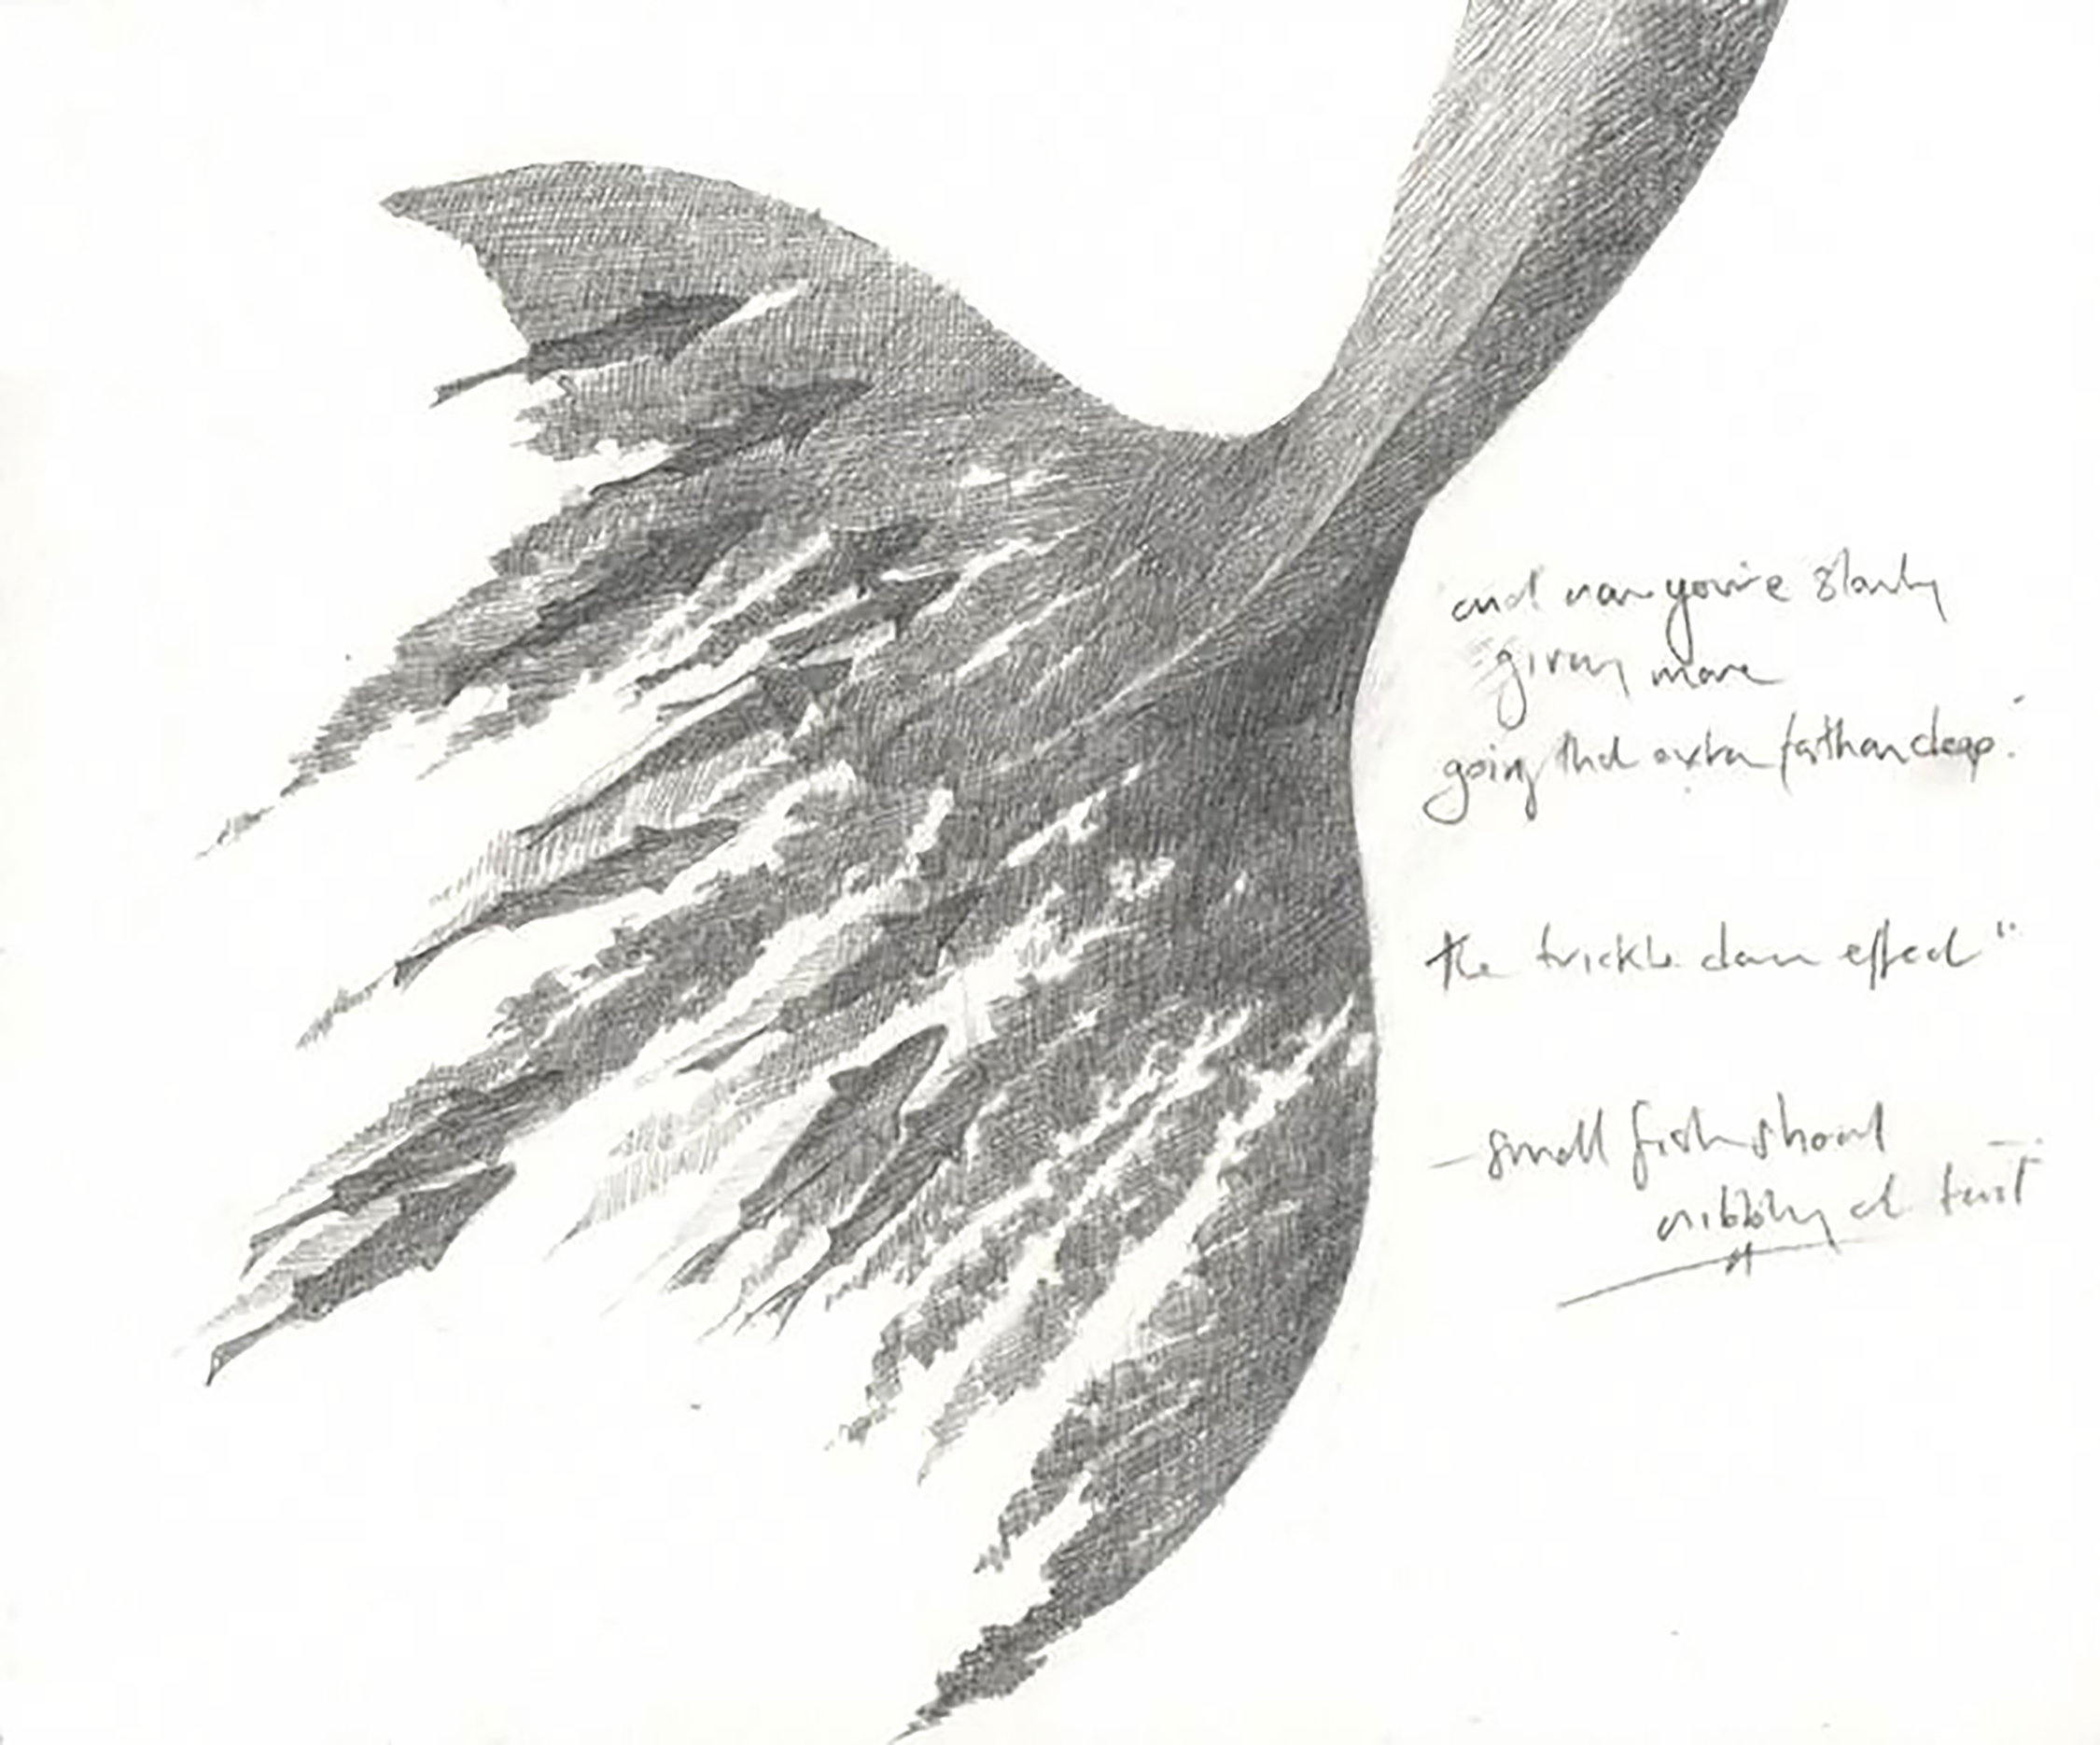  'Whalefall - Fluke' from  A Whistling of Birds  collaboration with poet  Isobel Dixon  